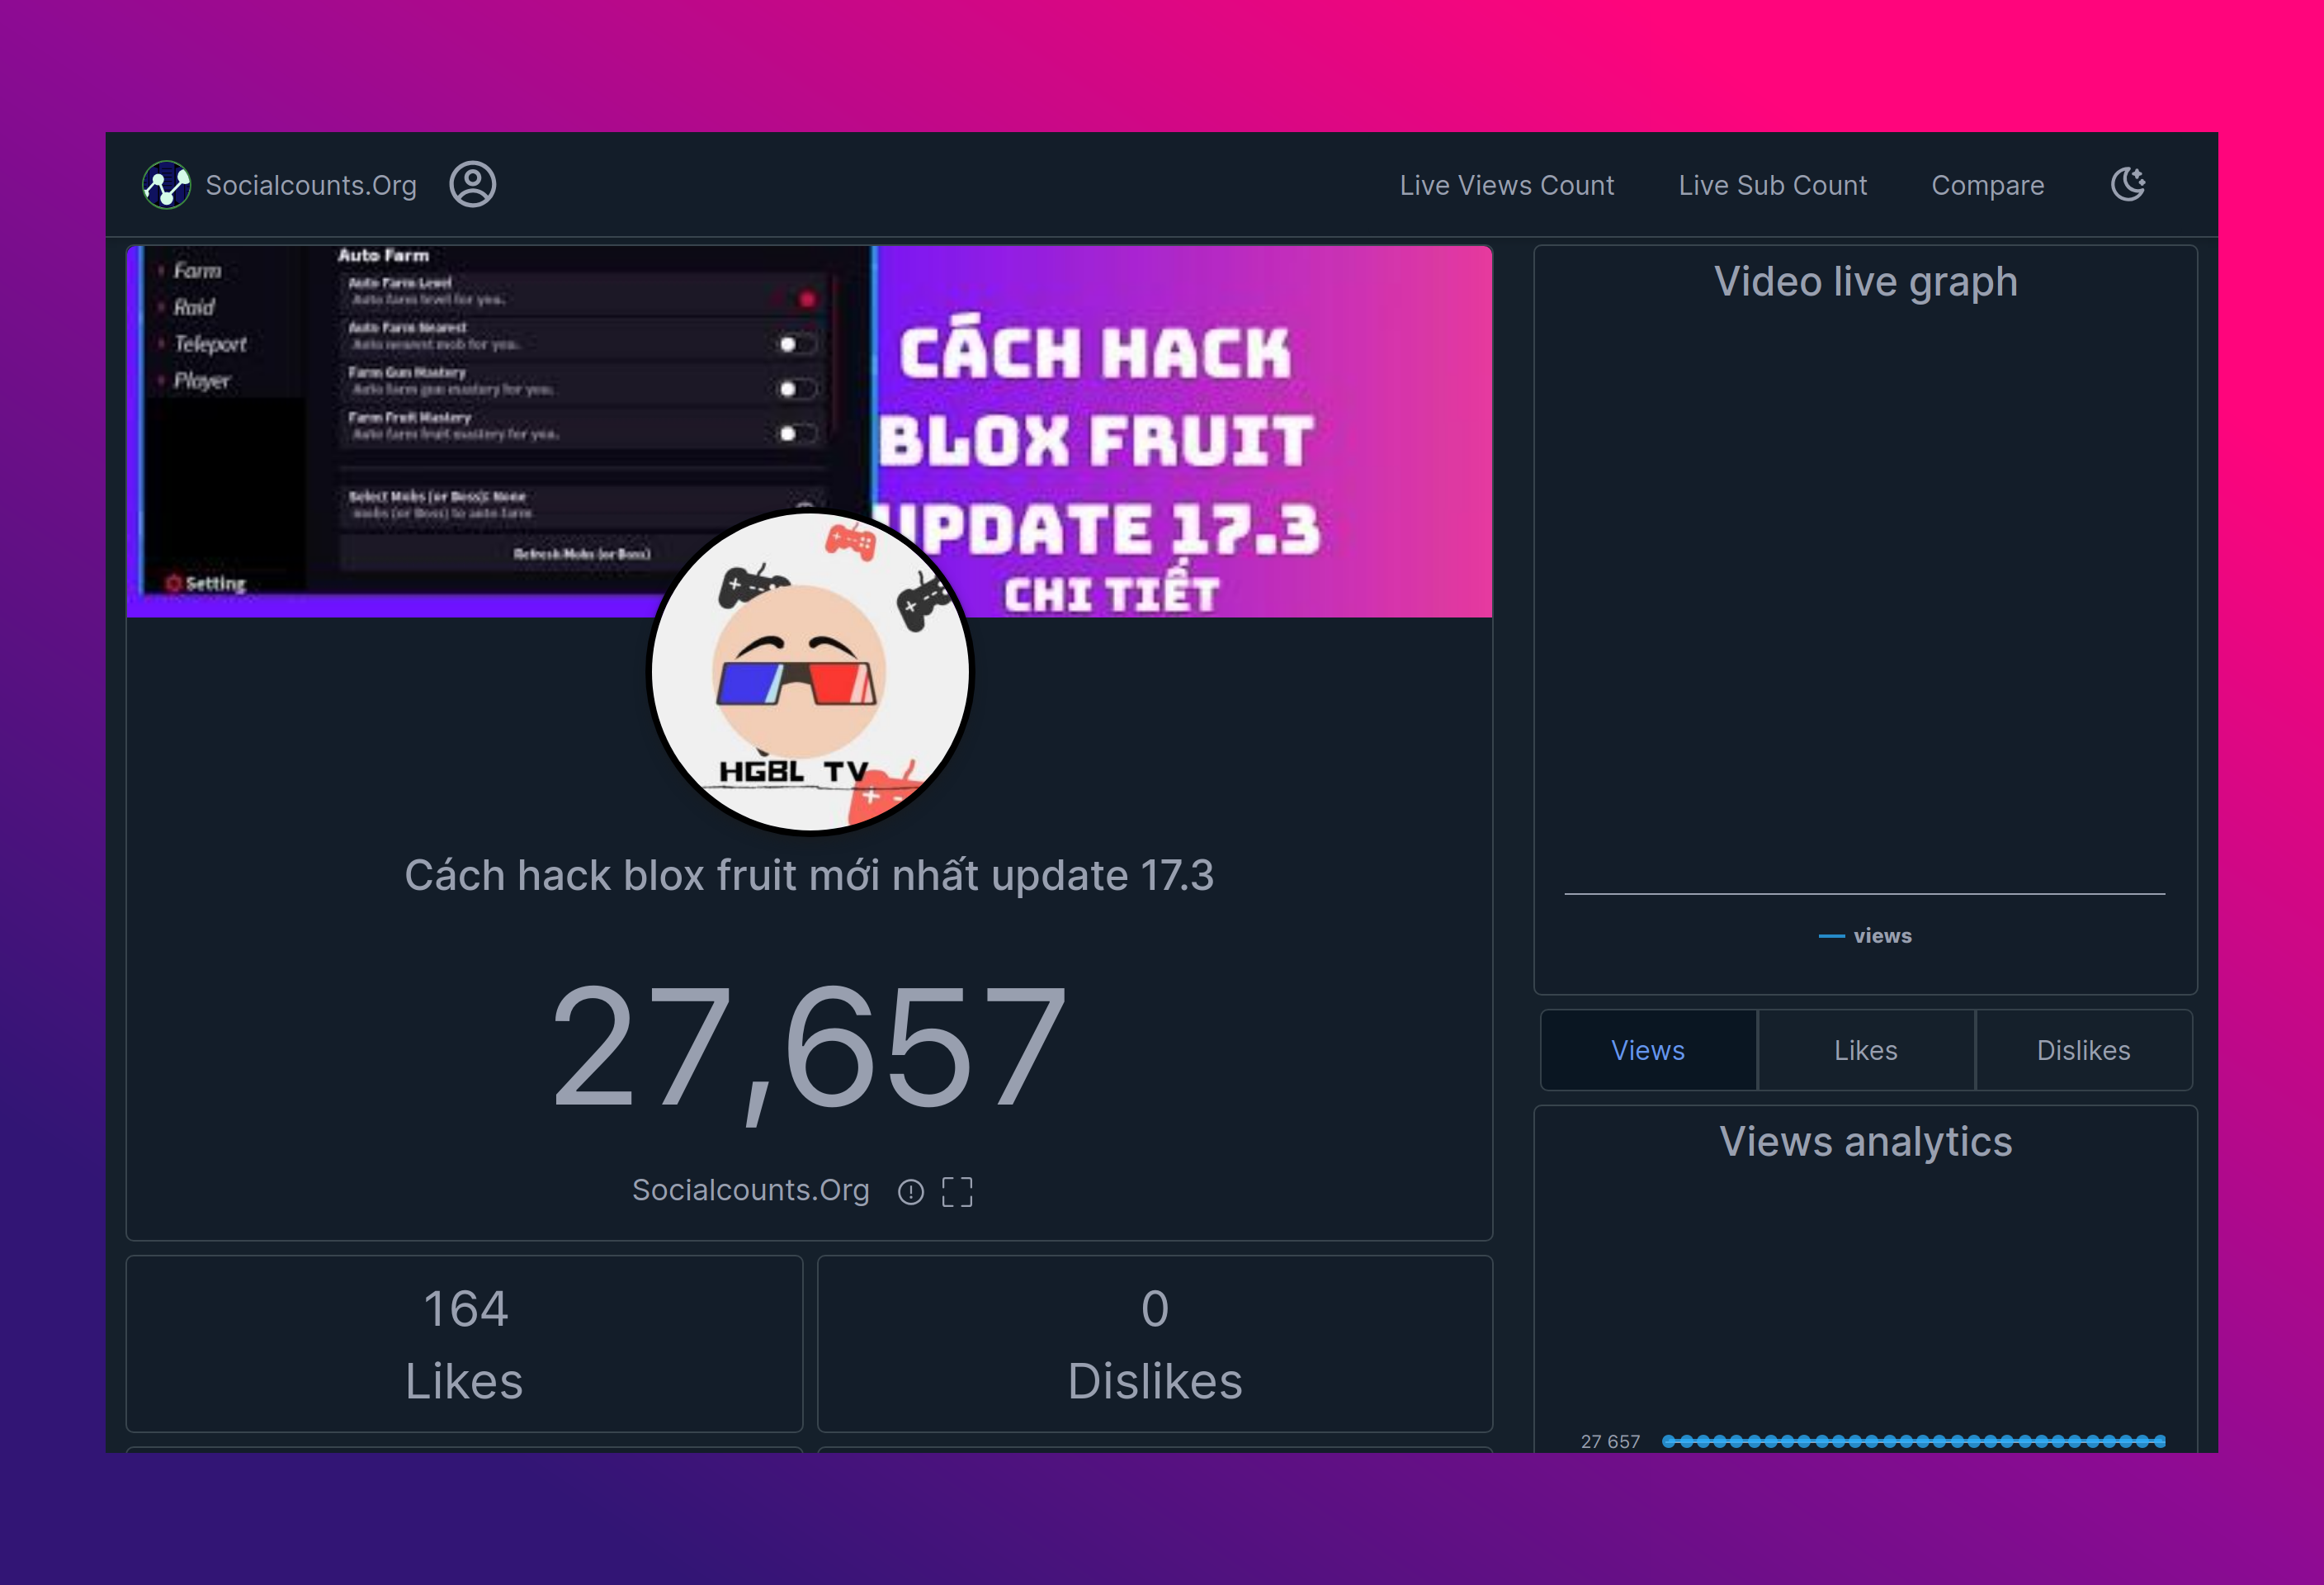 Cách hack blox fruit mới nhất update 17.3, Real-Time  Video View  Count